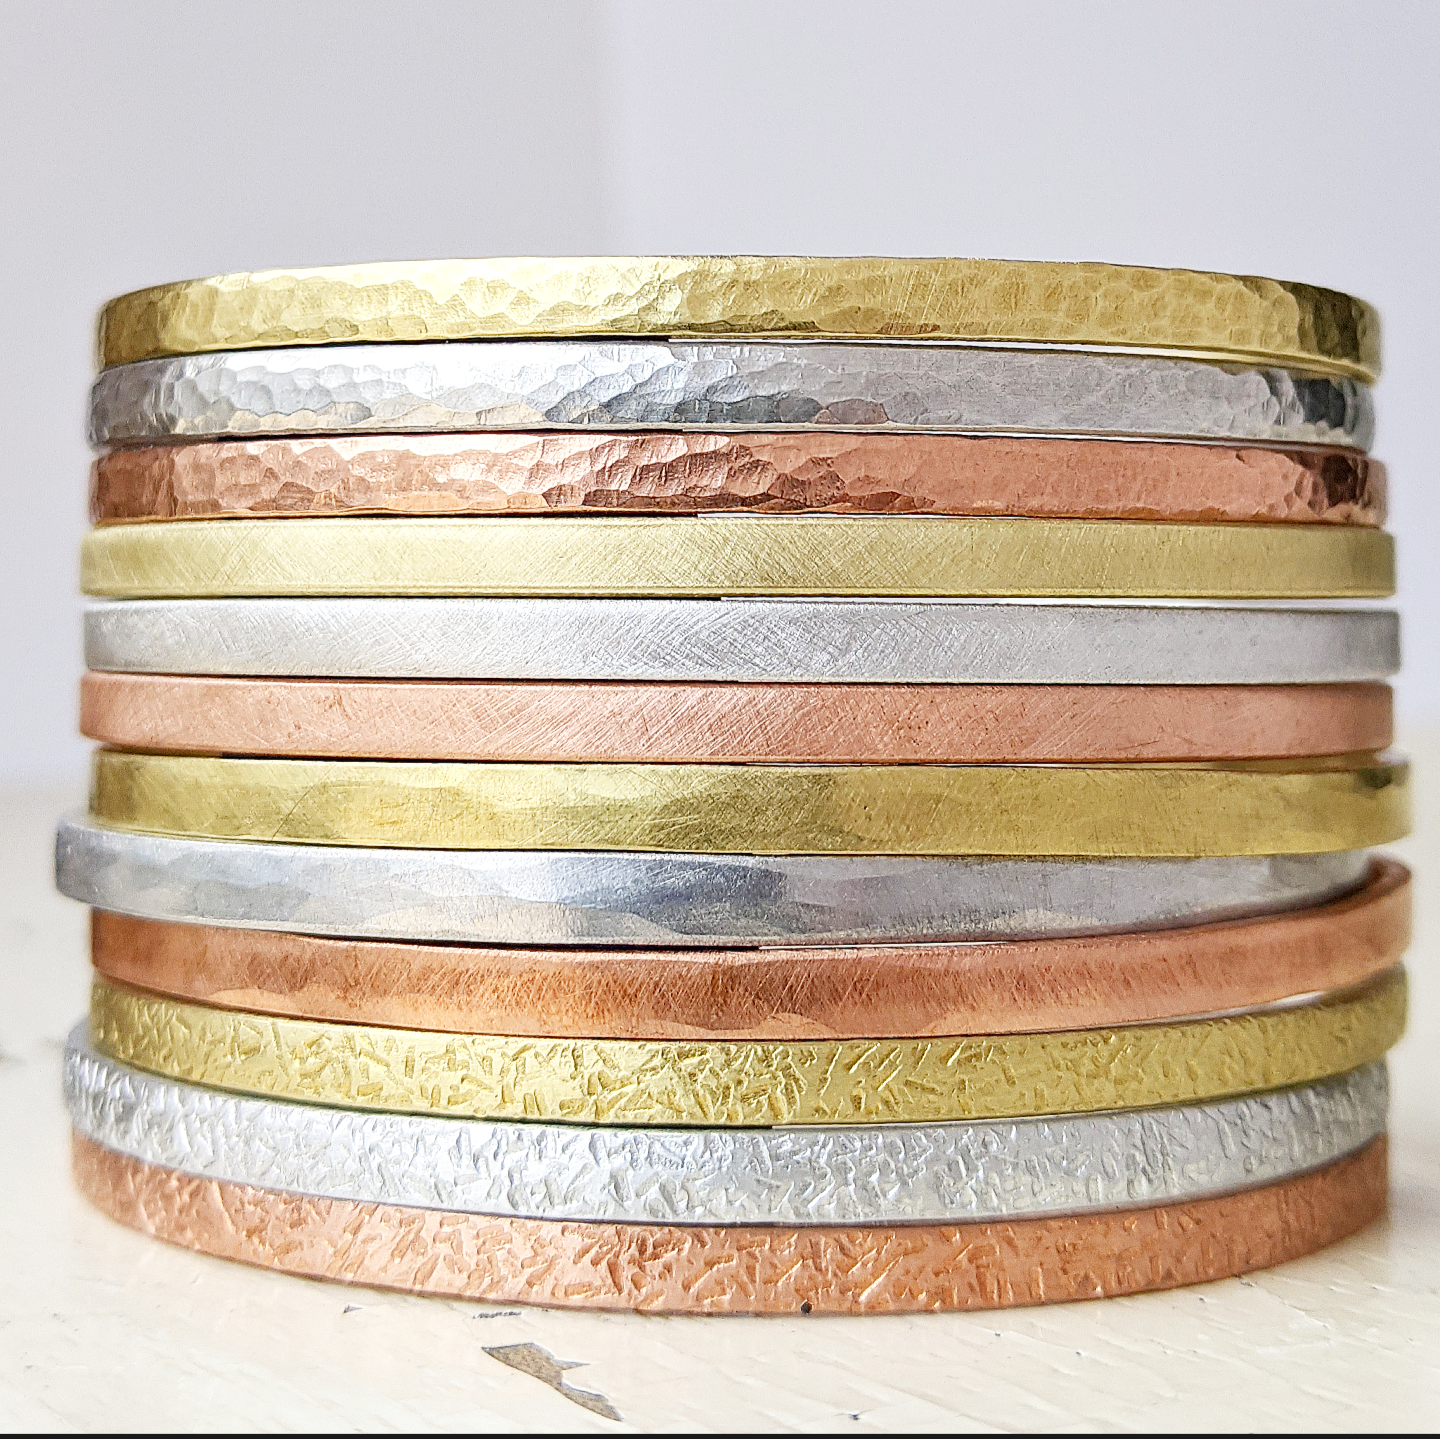 Textured Stacking Cuff Bracelet Class - Saturday March 9